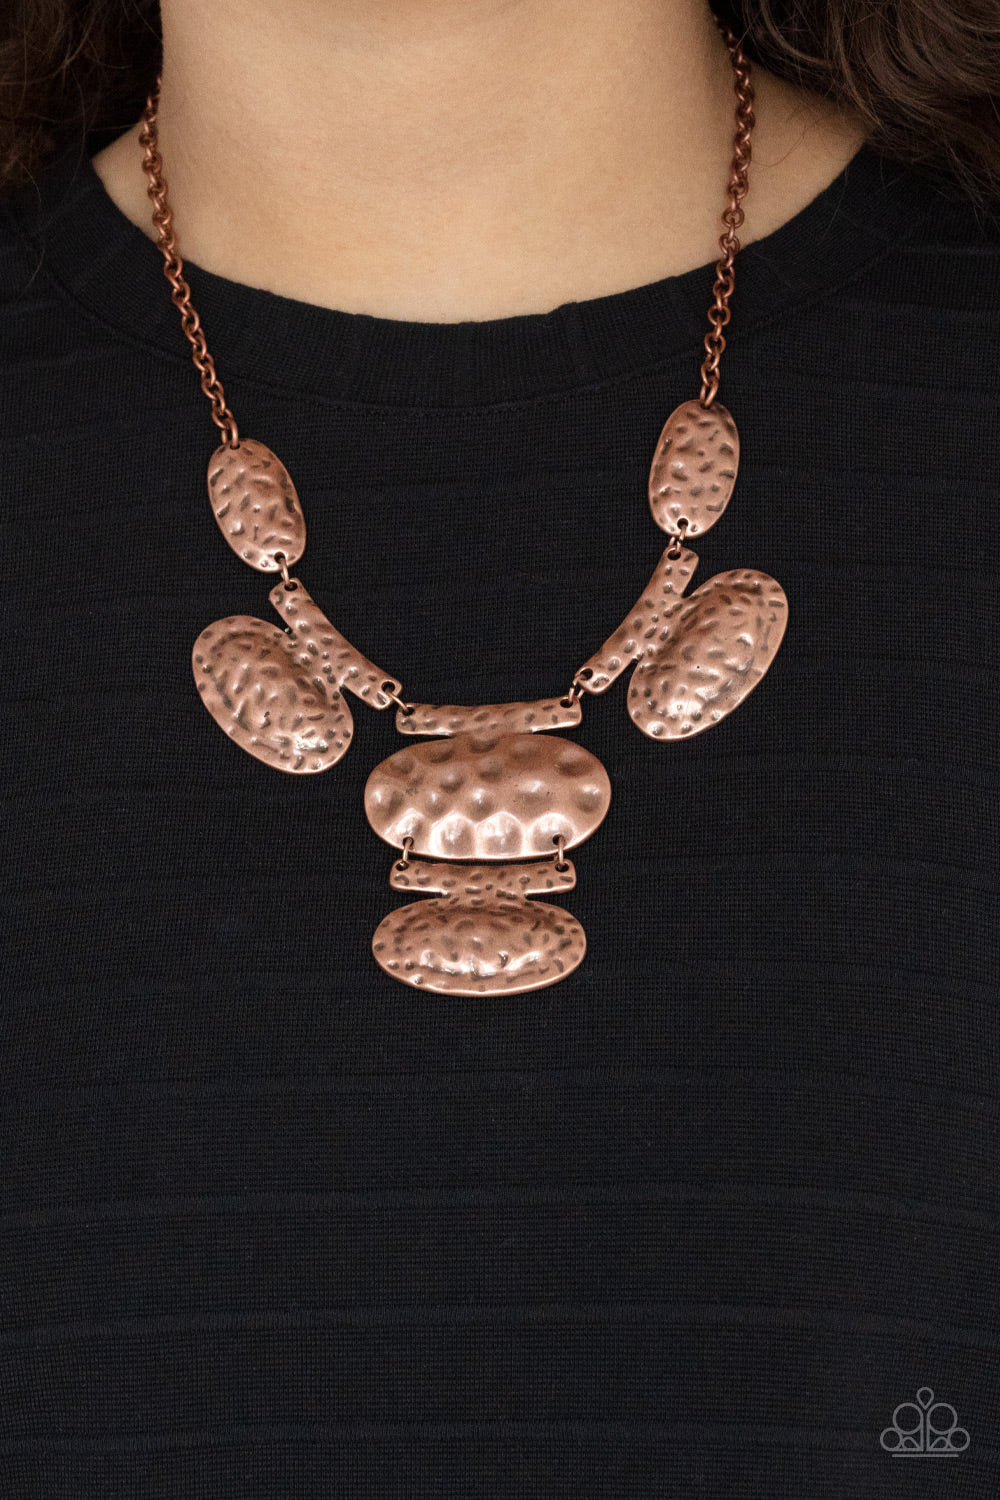 Gallery Relic Necklace - Copper